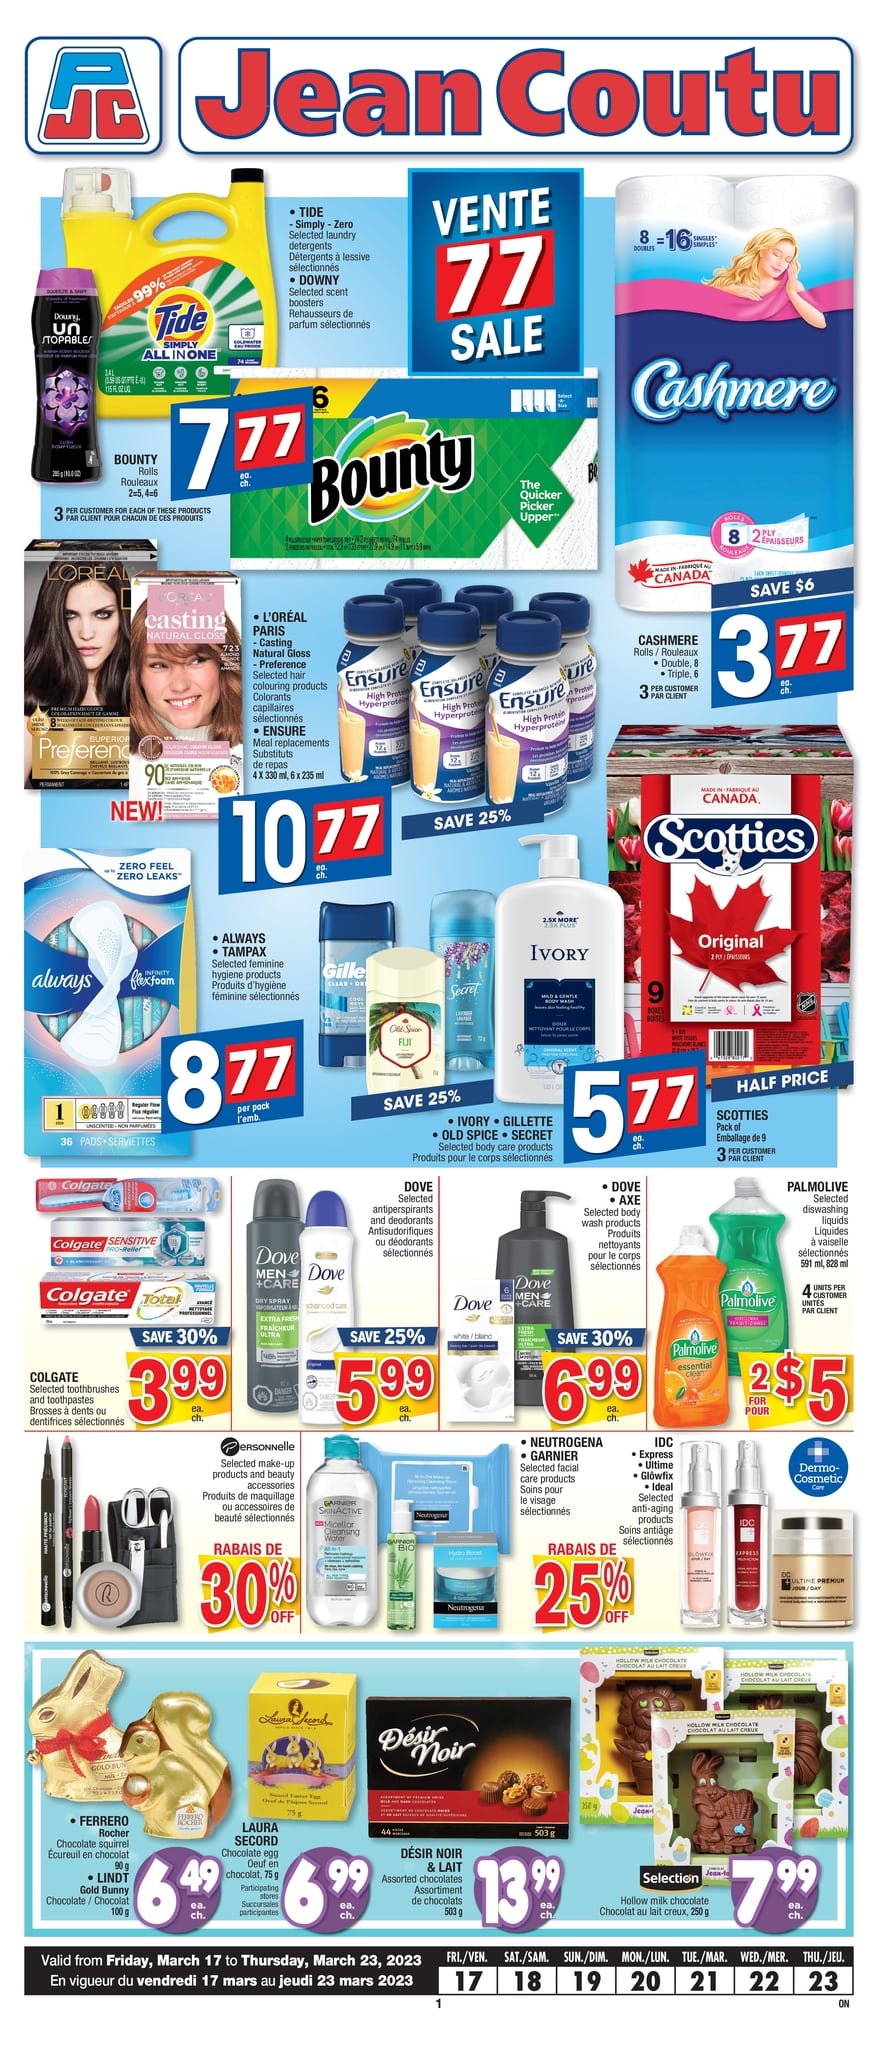 Jean Coutu - Weekly Flyer Specials - Page 1